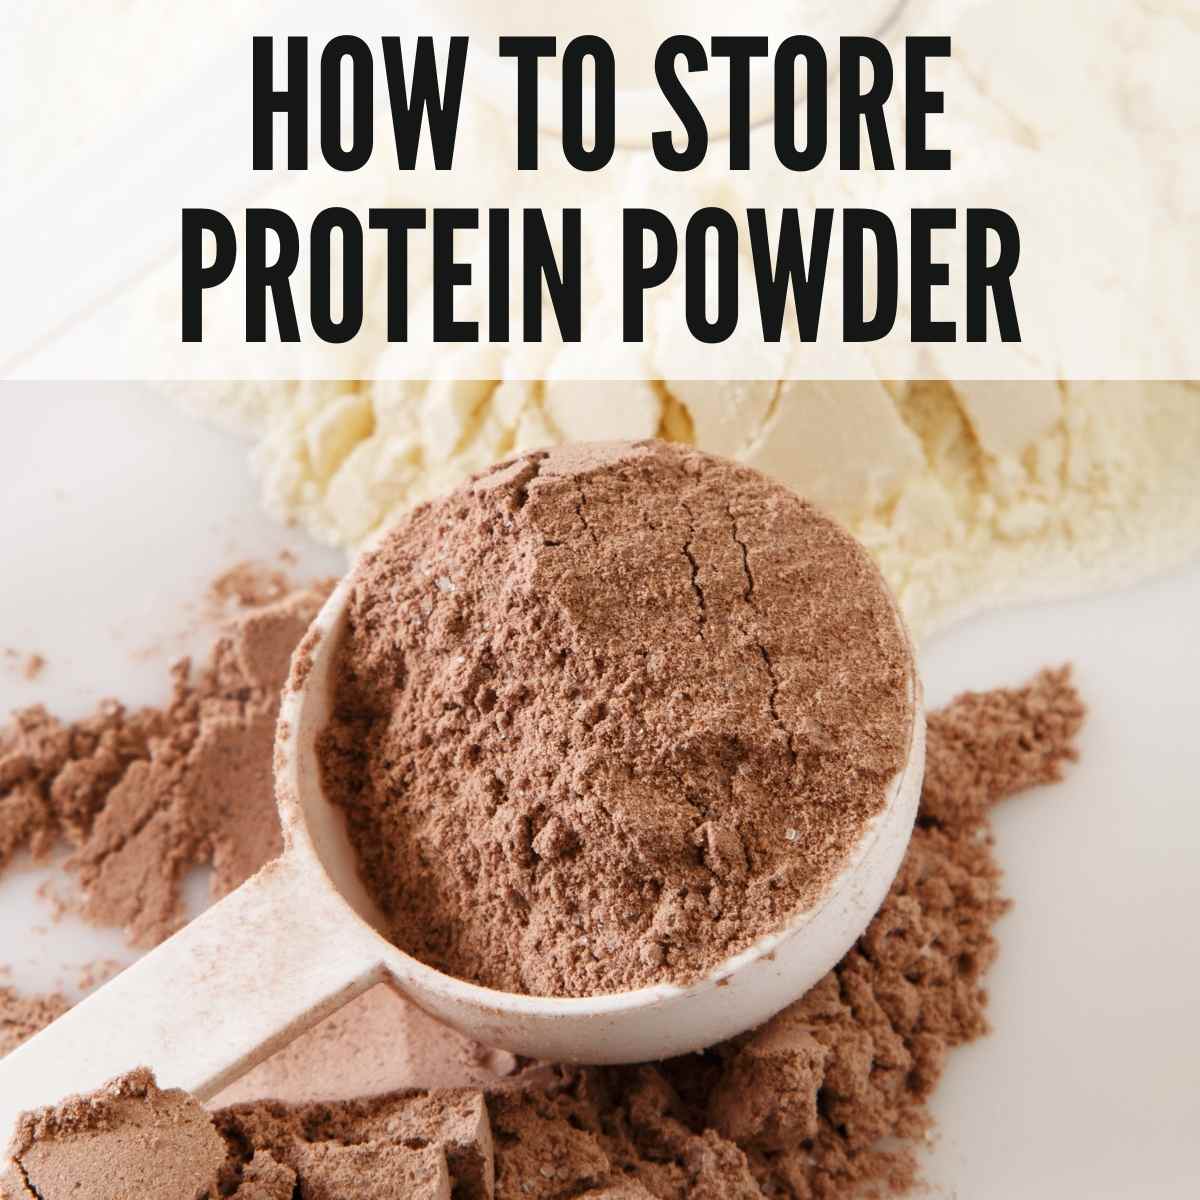 https://www.texanerin.com/content/uploads/2022/04/how-to-store-protein-powder-picture.jpg